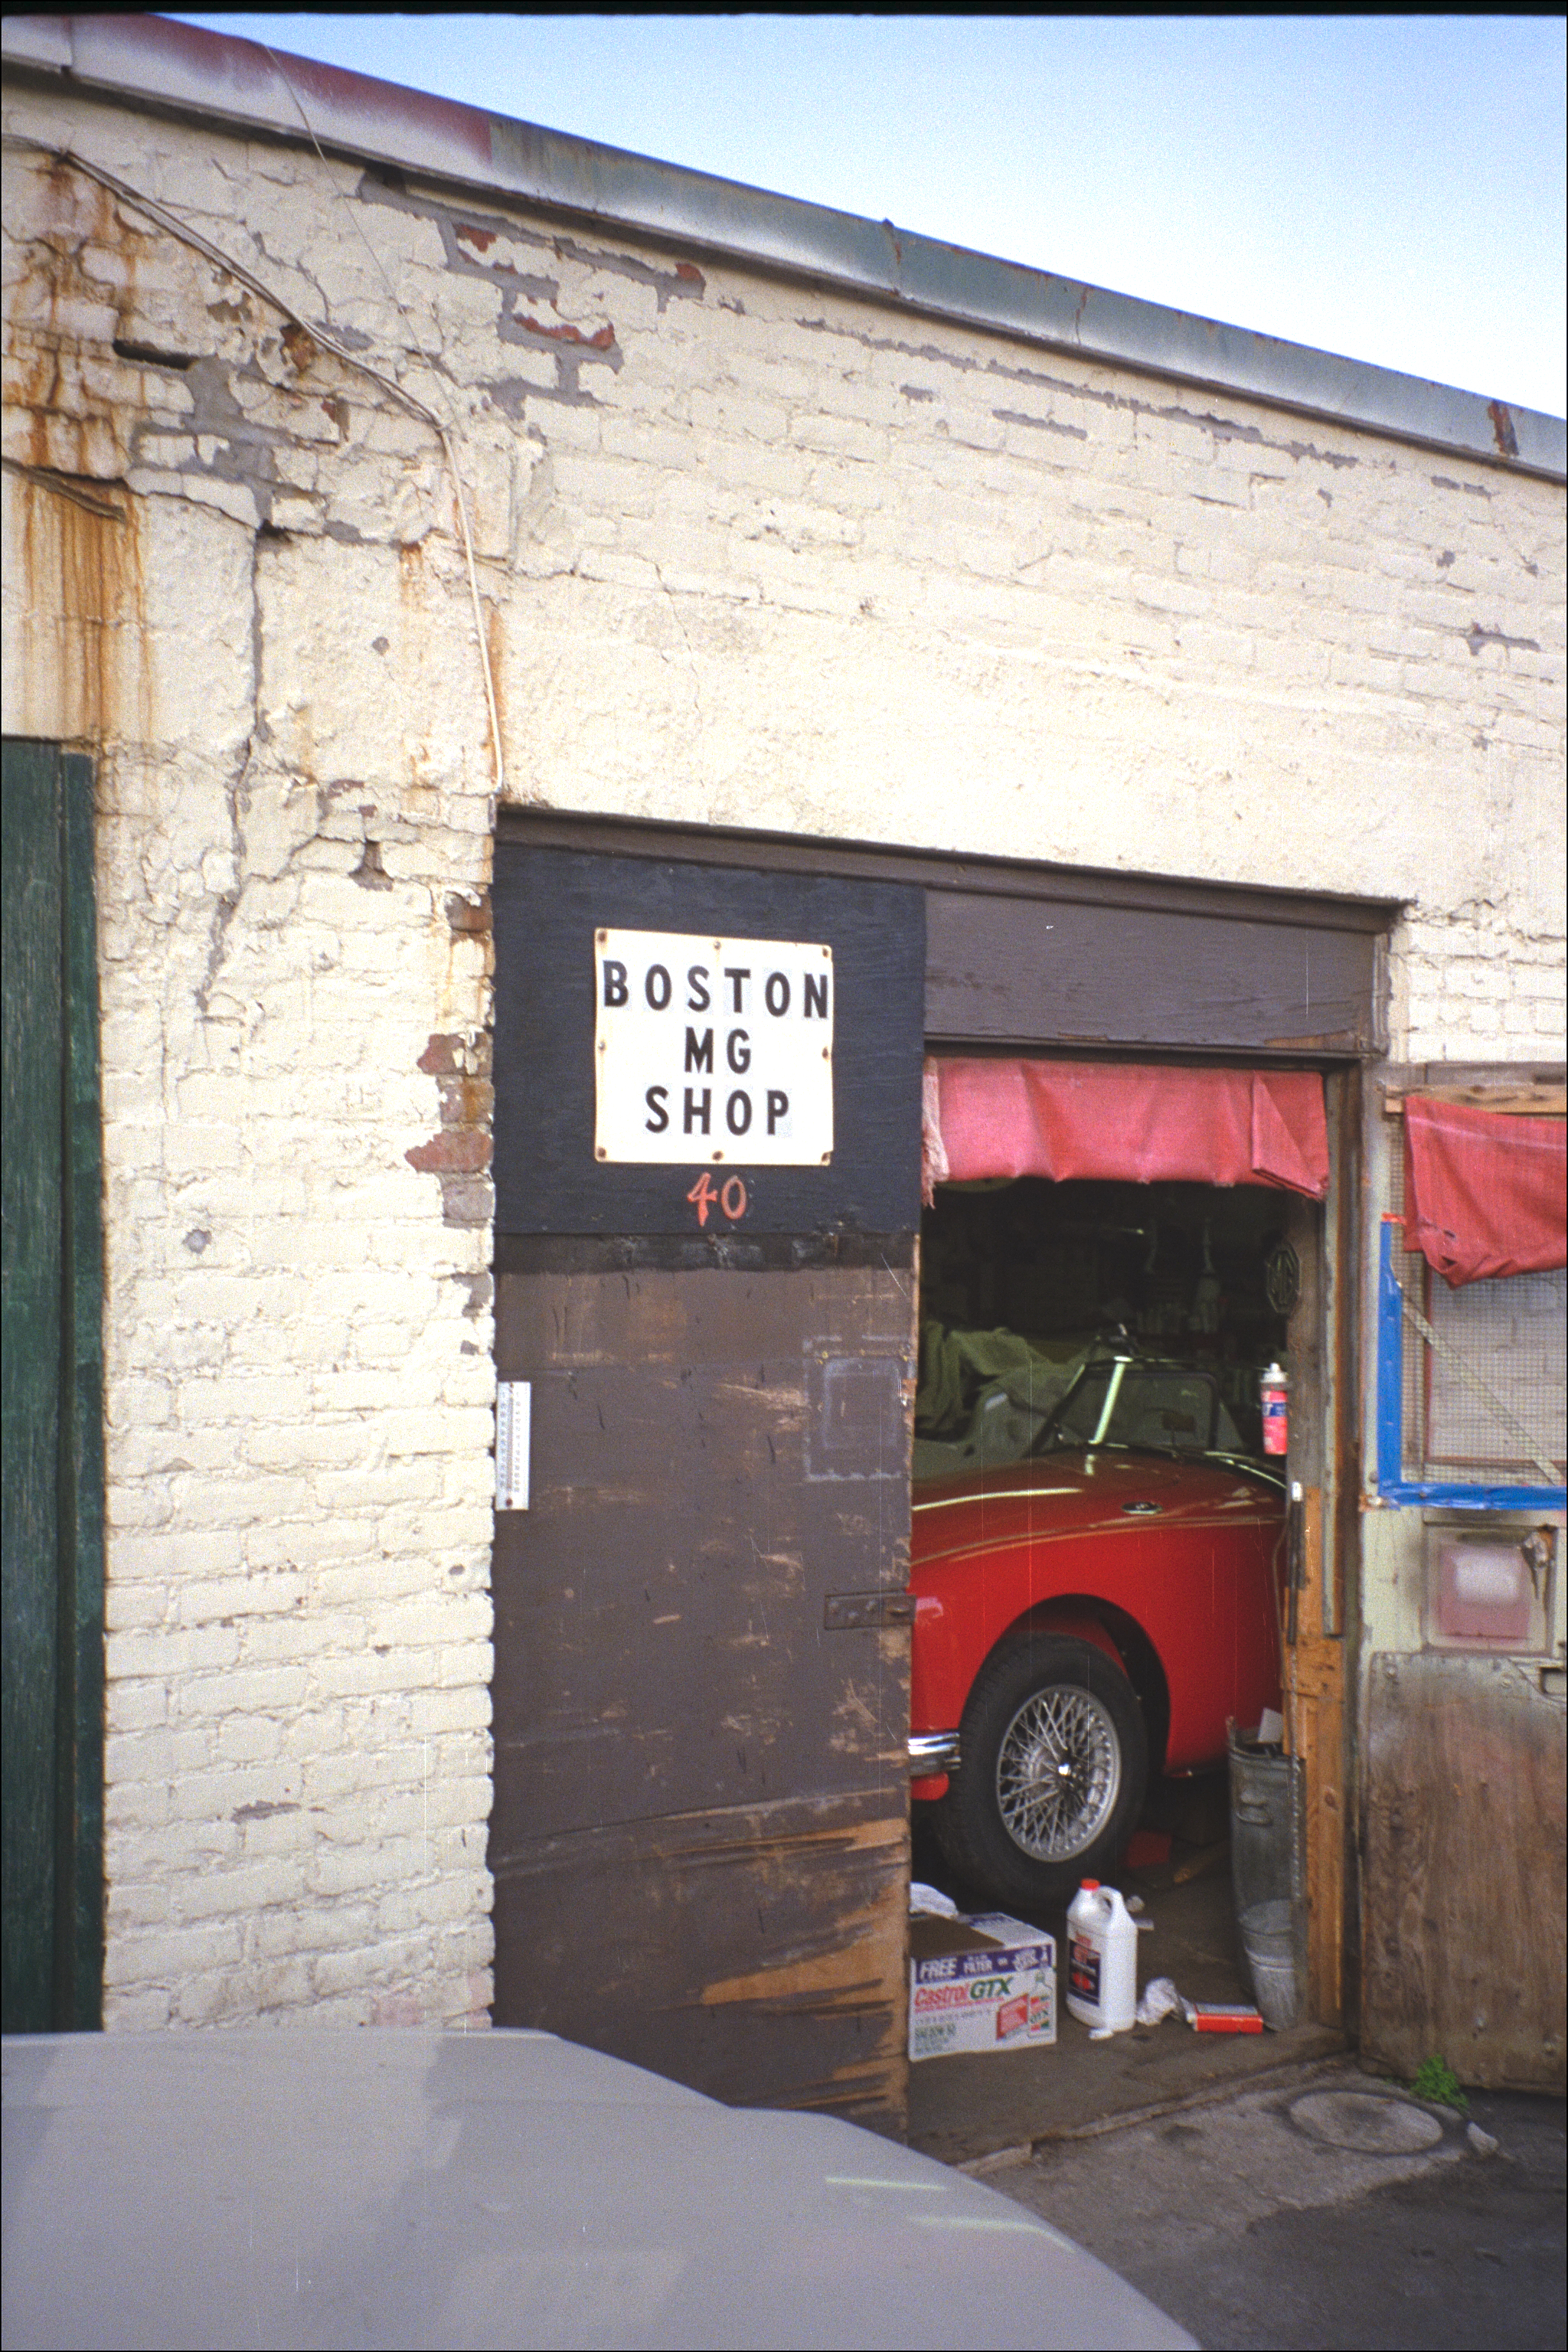 IMG2026 The Boston MG Shop, in Brighton in those days